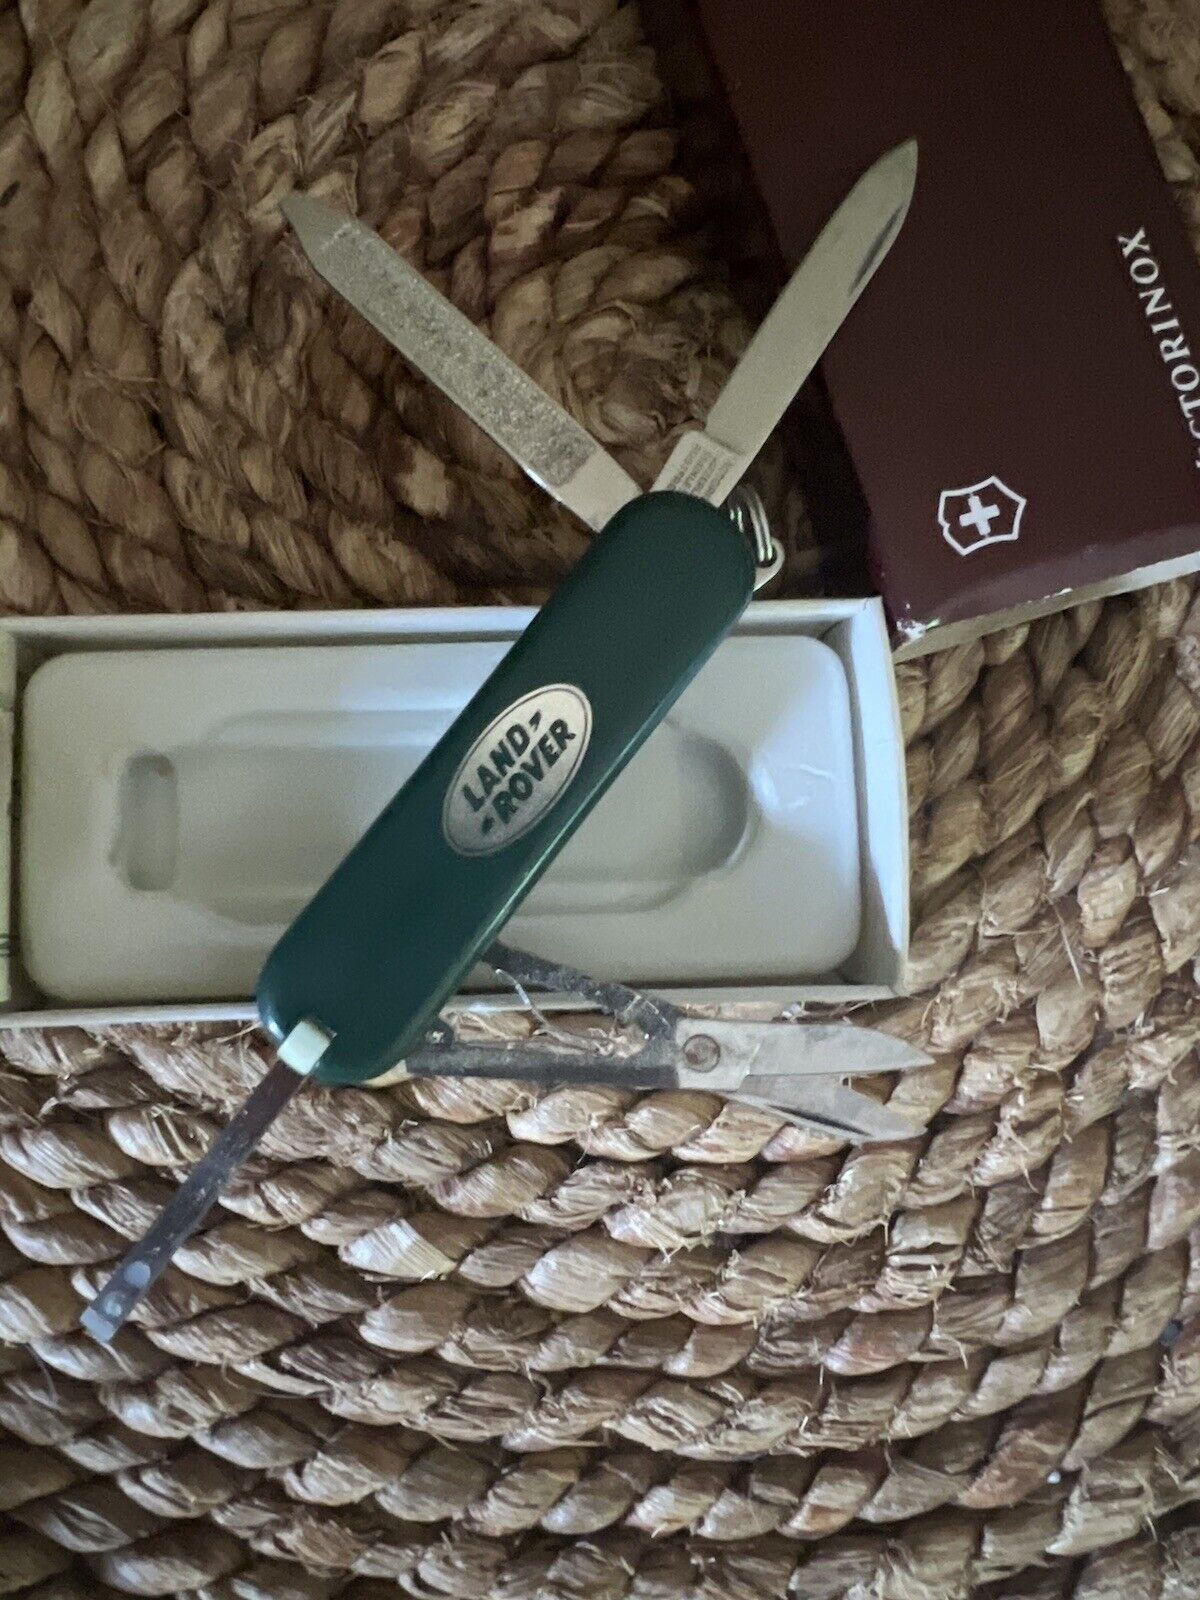 LAND ROVER Victorinox Swiss Army Knife Green New In box Rare Small Keychain